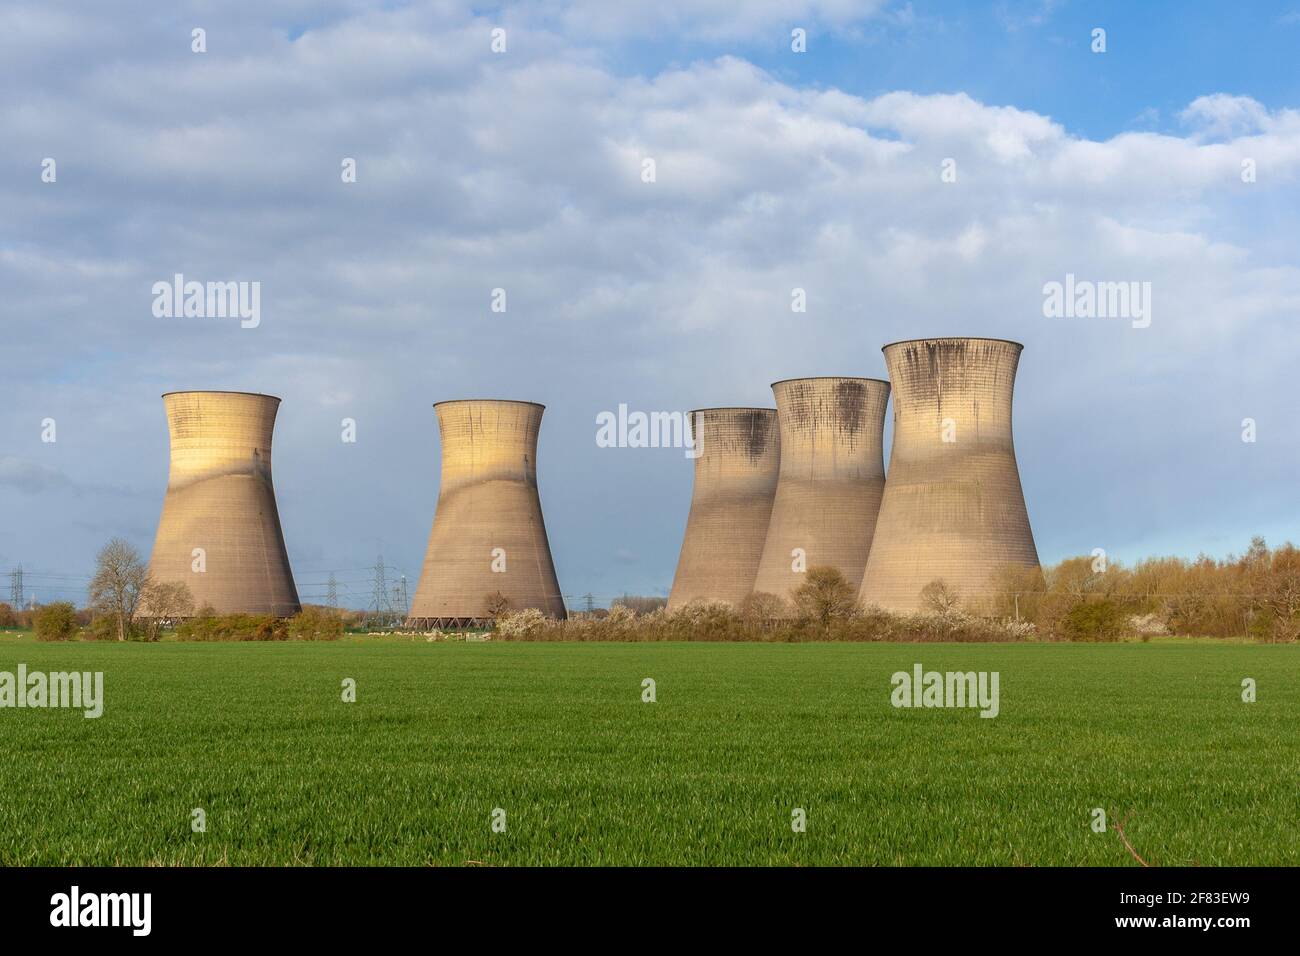 Willington, Derby, UK, April,11,2021:The large cooling towers of the now disused Willington Power Station. These tall iconic structures now standing d Stock Photo